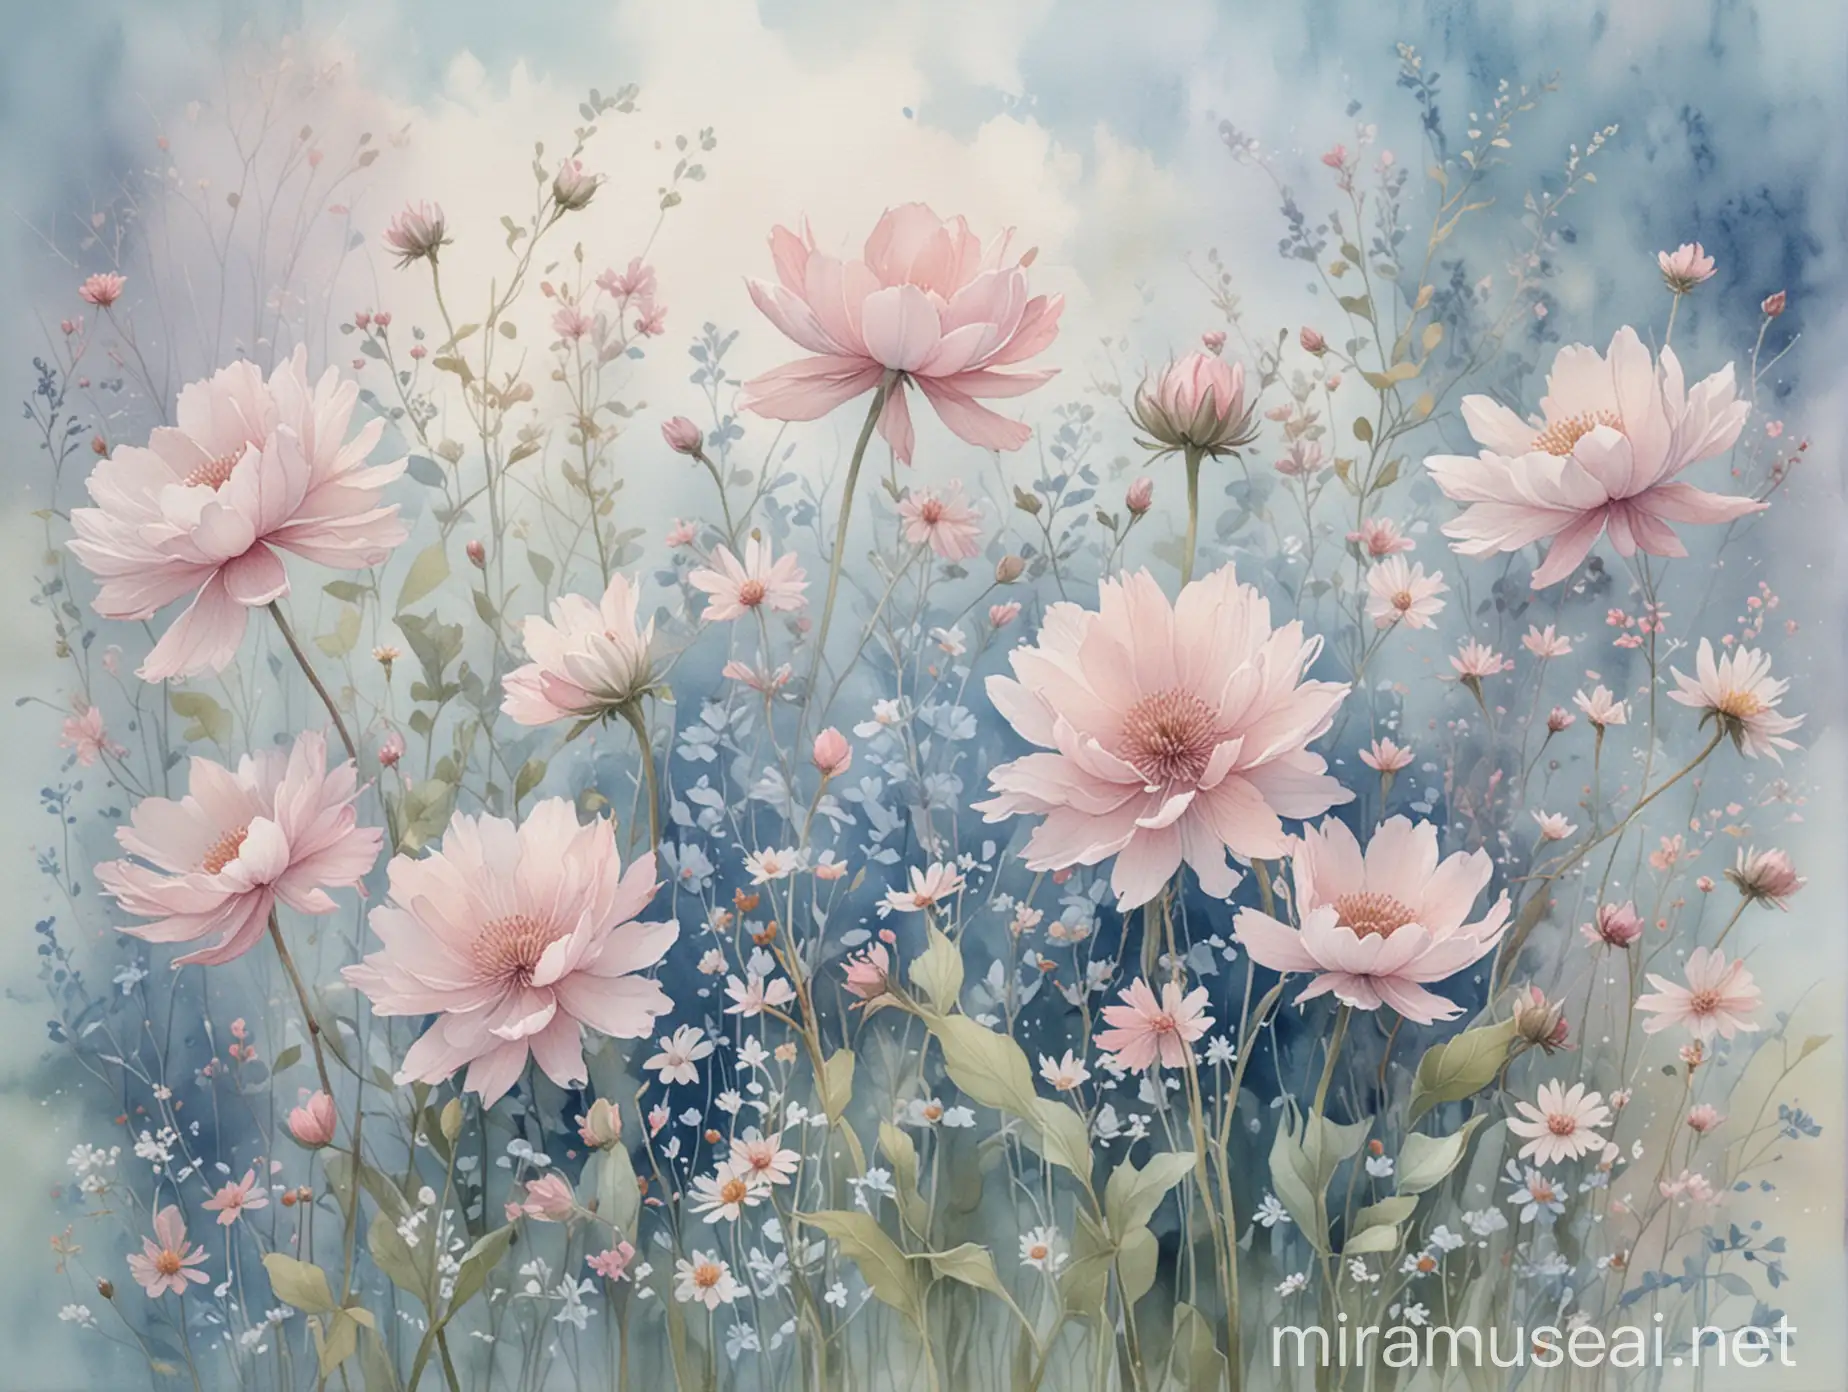 Watercolor Painting with Soft Blues and Pinks and Floral Silhouettes